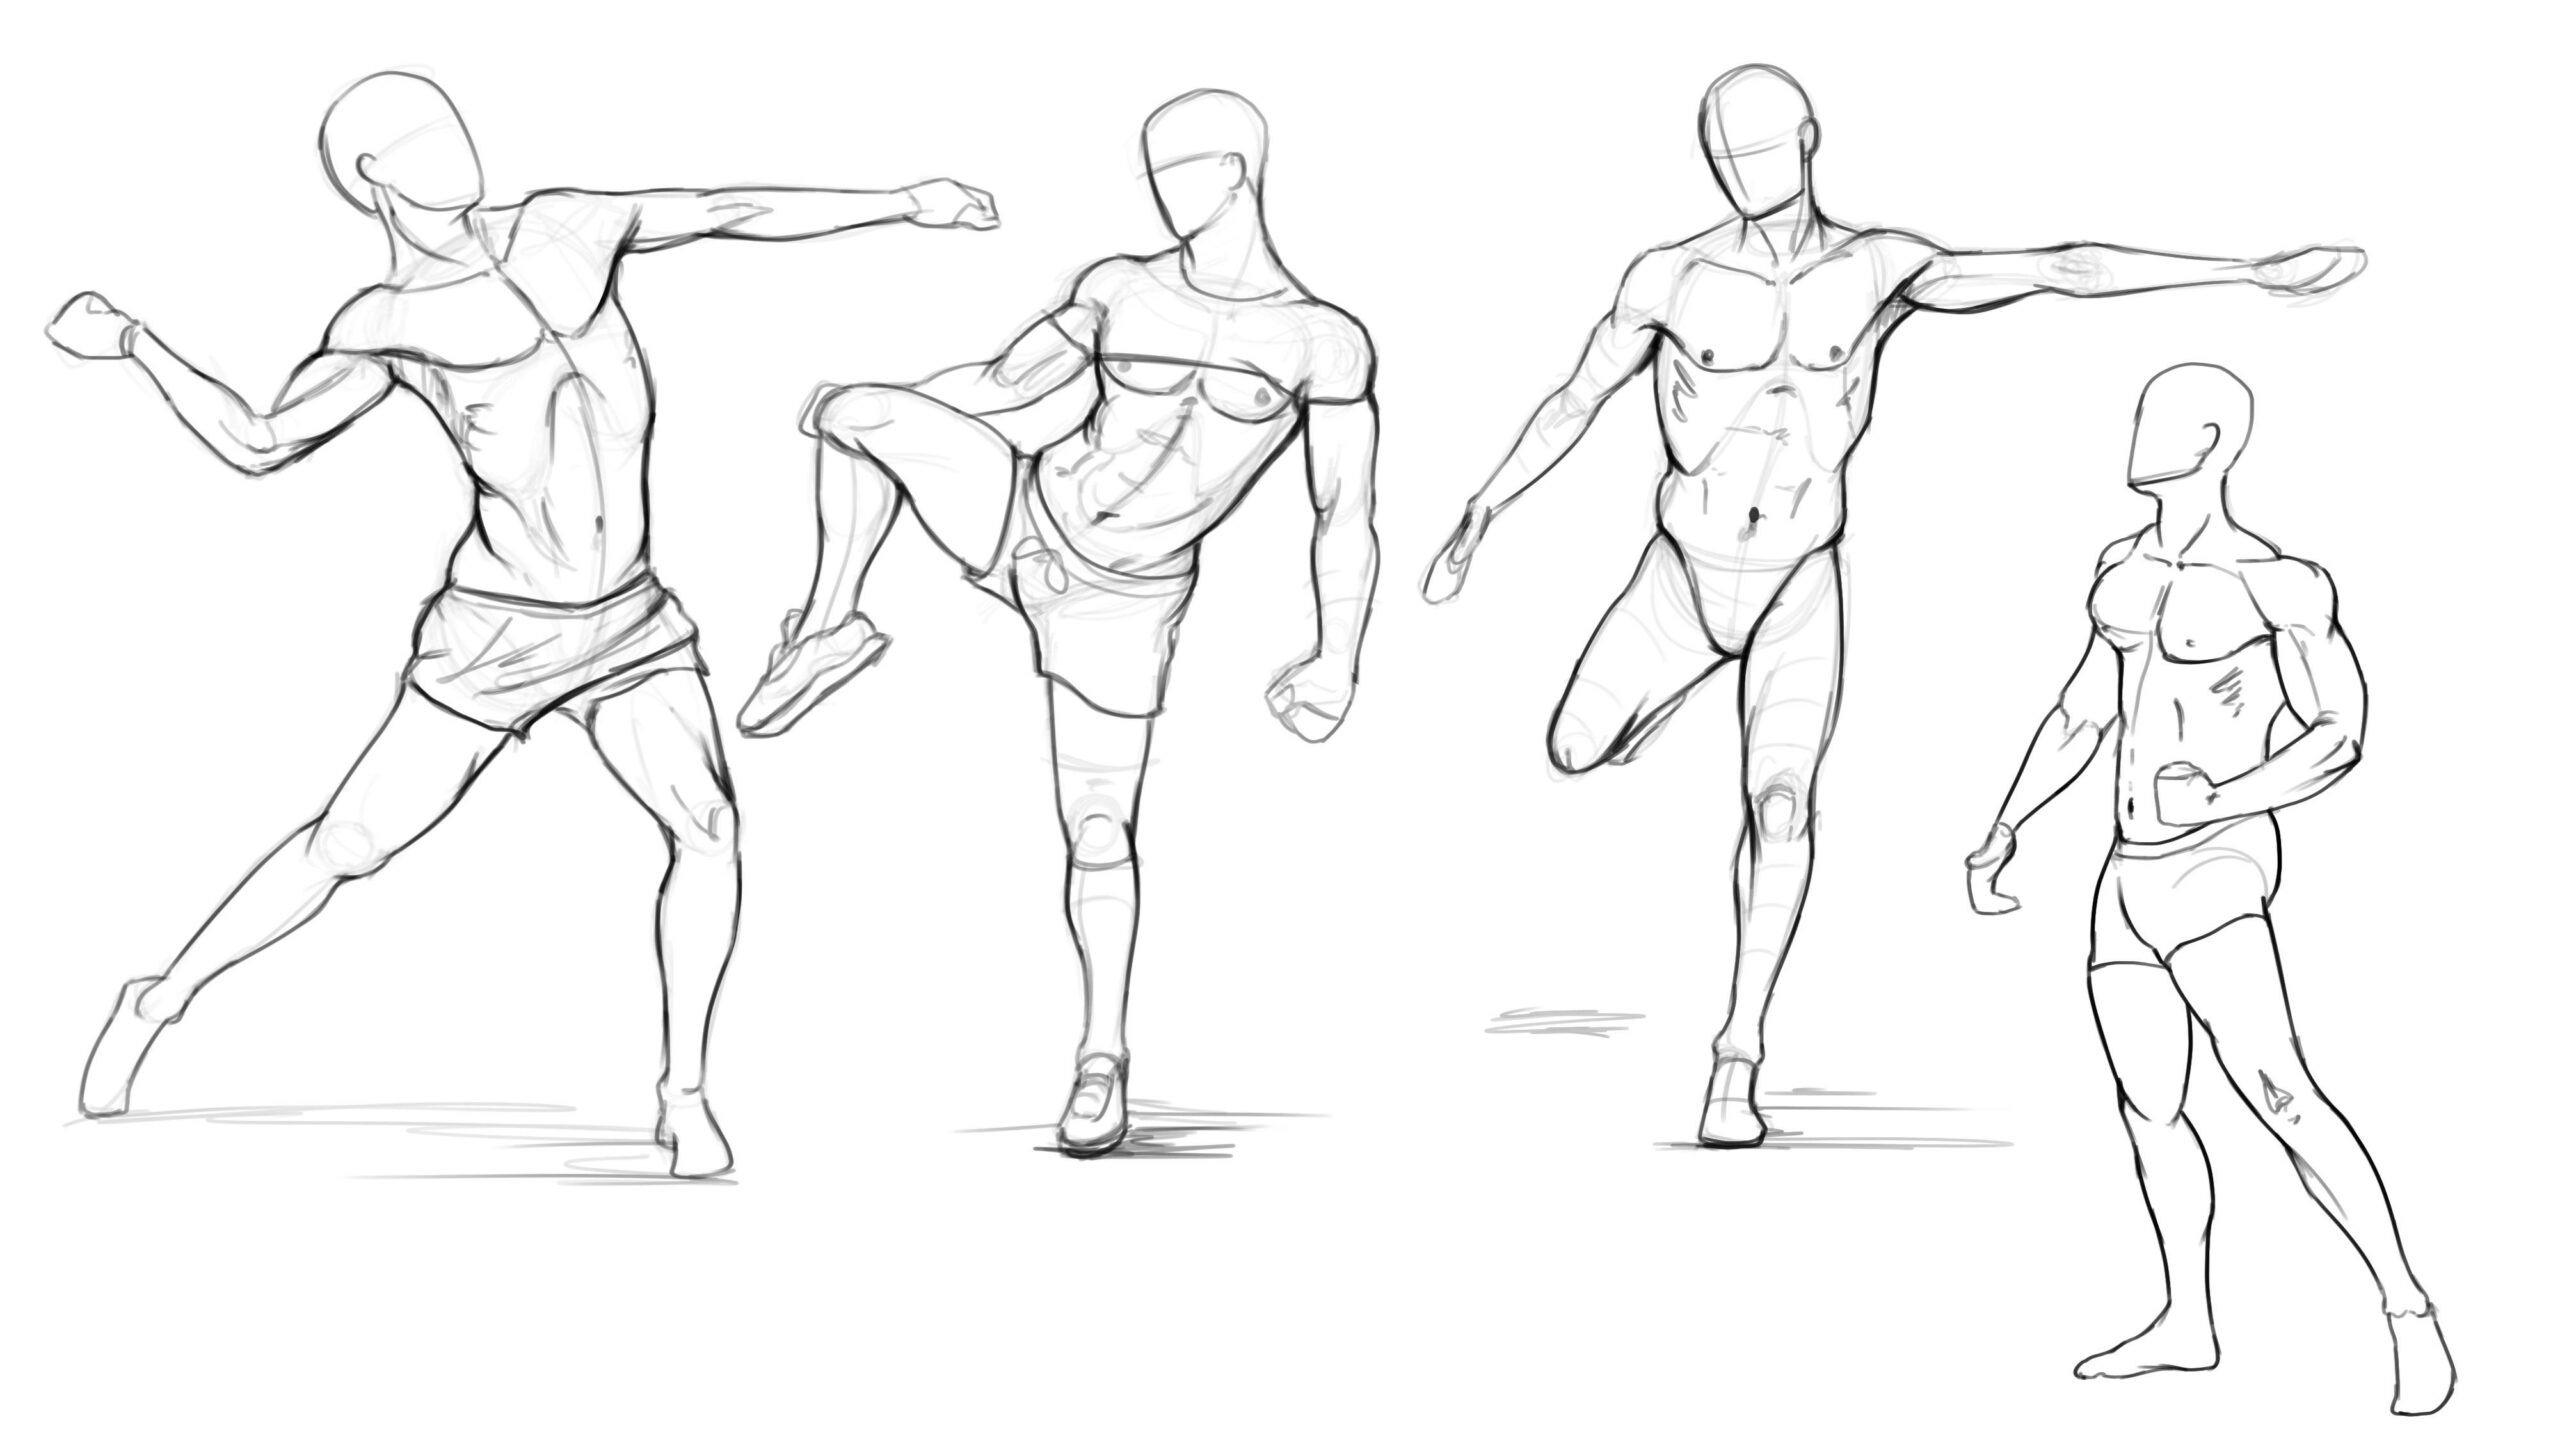 Easy Steps to Figure Drawing - Anatomy of Male & Female Body | Udemy